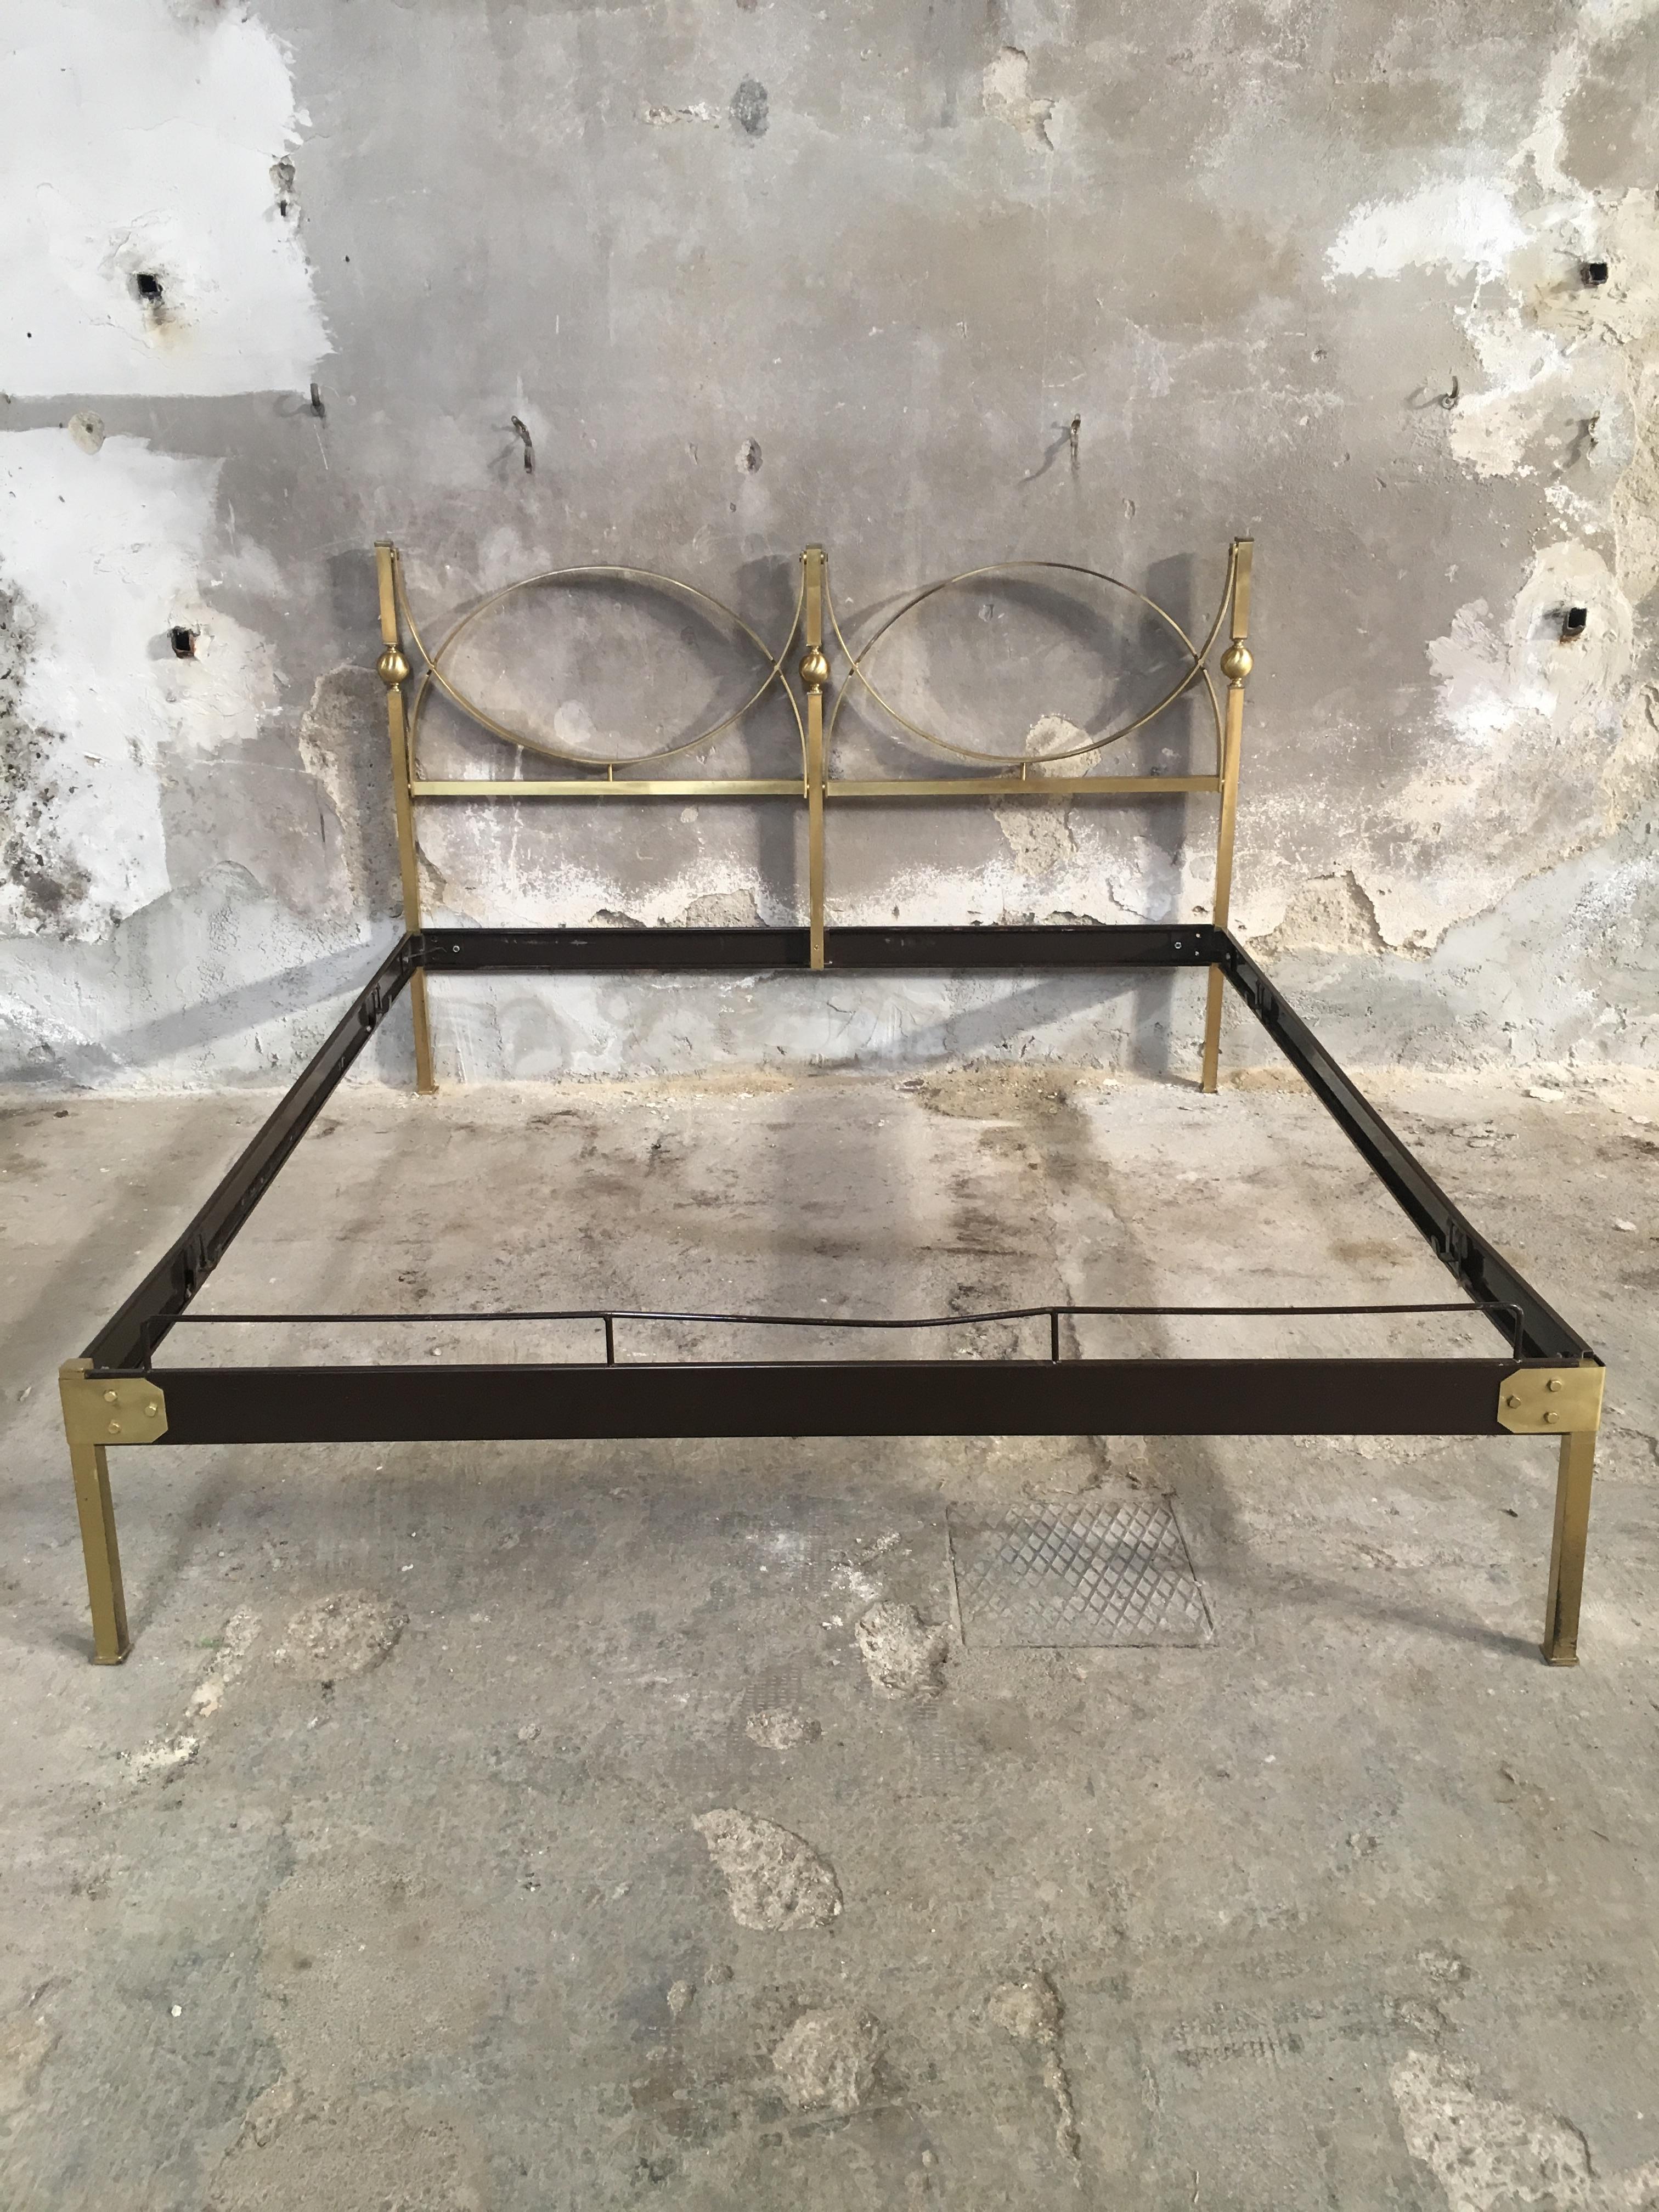 Mid-Century Modern Italian gilt brass bed with lacquered metal structure, 1960s
the bed needs a mattress of cm. 170 x 190.